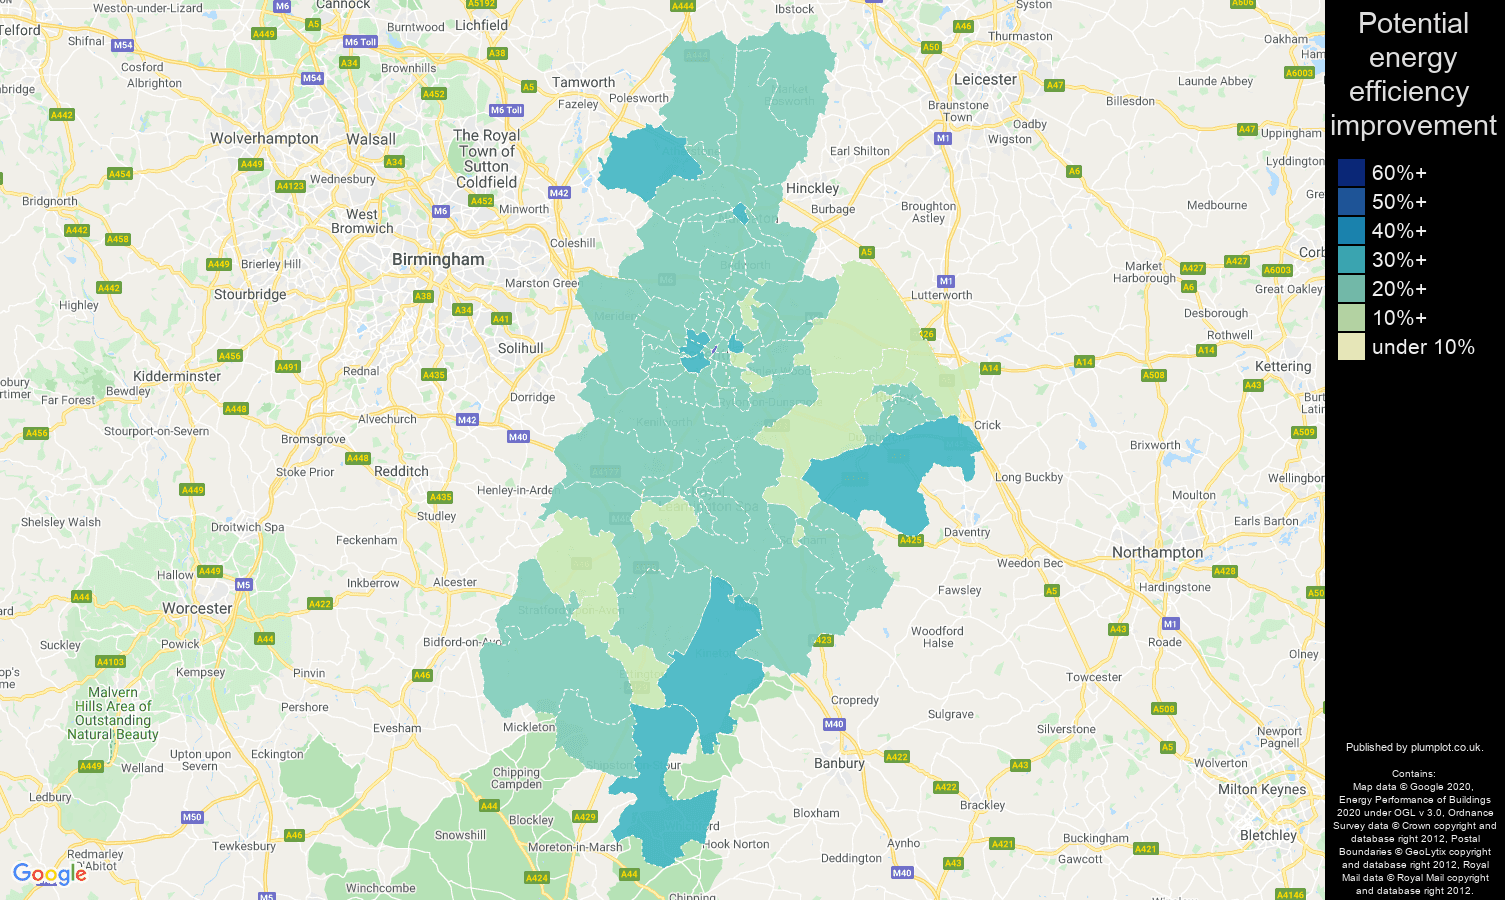 Coventry map of potential energy efficiency improvement of houses